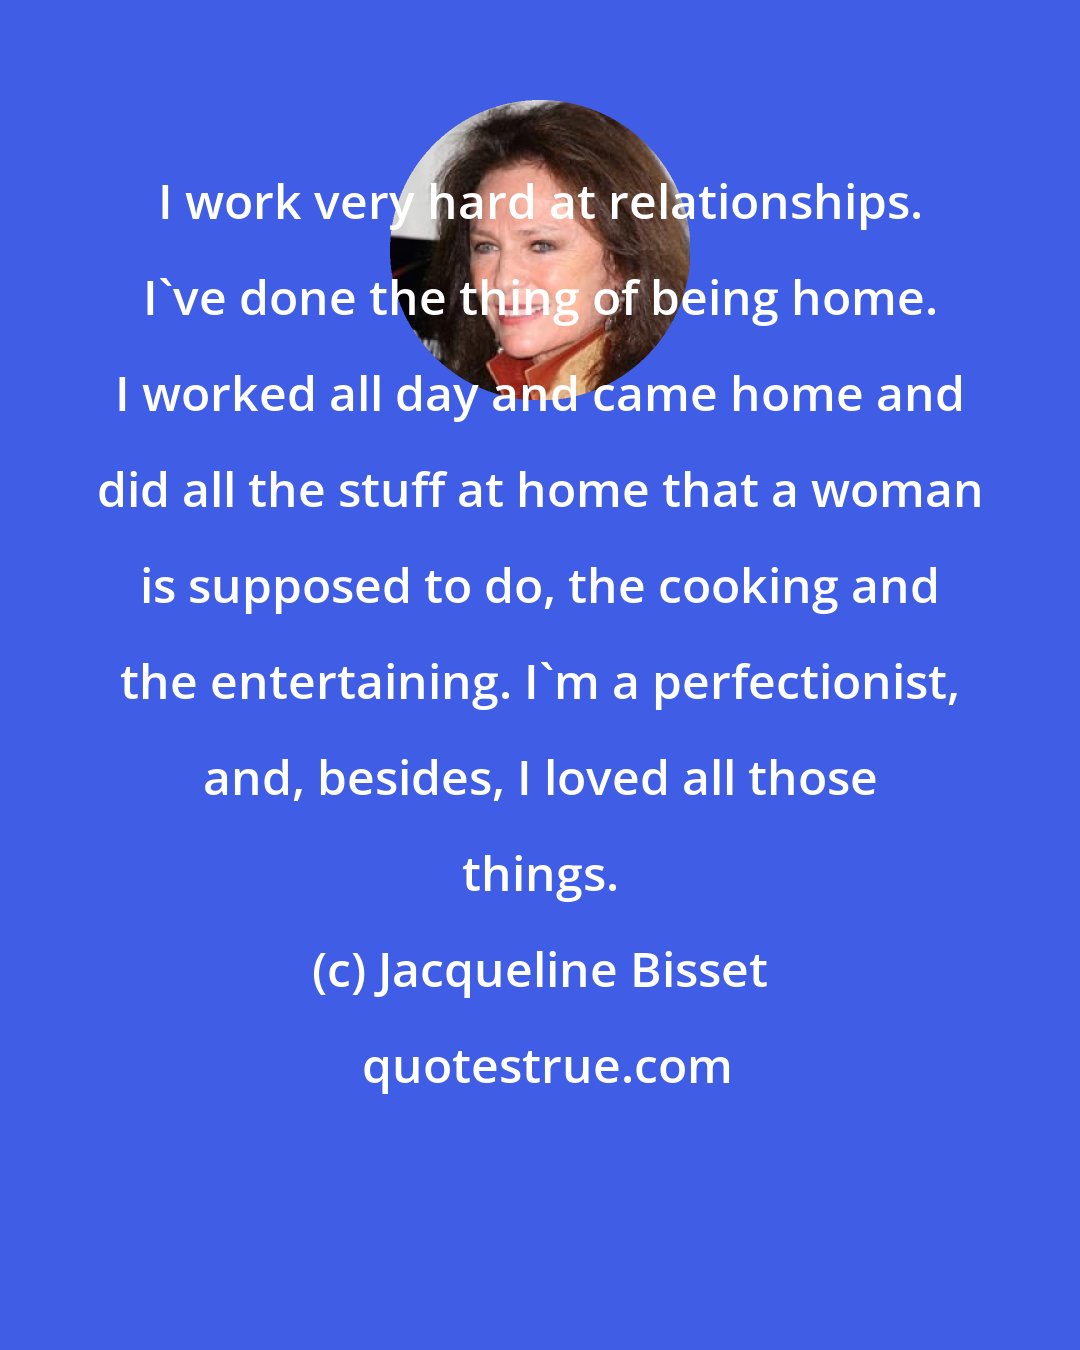 Jacqueline Bisset: I work very hard at relationships. I've done the thing of being home. I worked all day and came home and did all the stuff at home that a woman is supposed to do, the cooking and the entertaining. I'm a perfectionist, and, besides, I loved all those things.